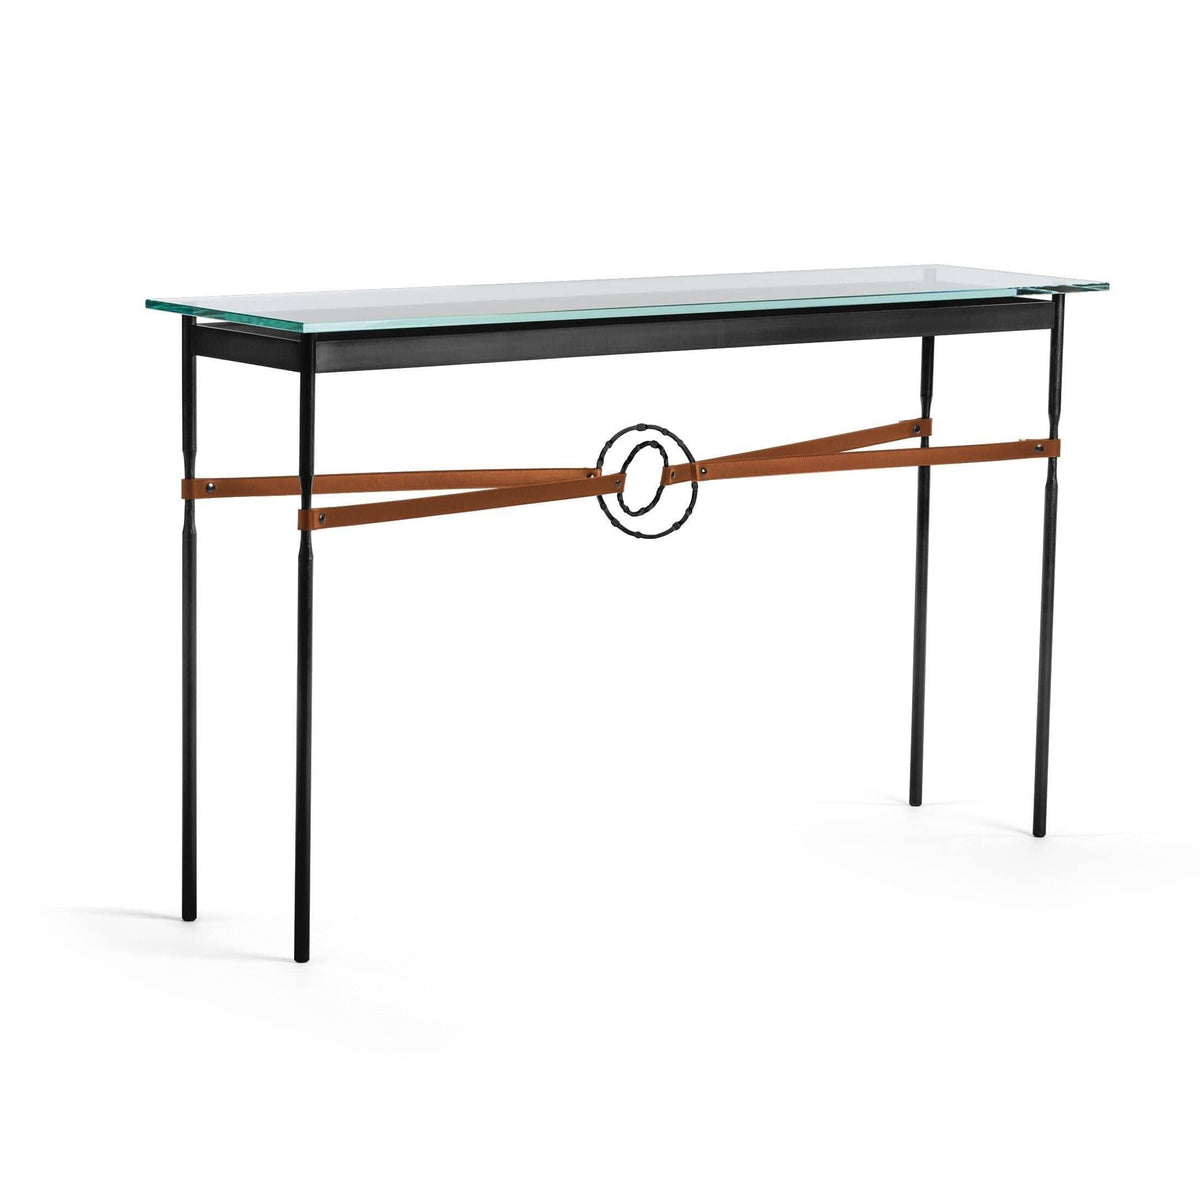 Hubbardton Forge - Equus Chestnut Leather Console Table - 750118-10-10-LC-VA0714 | Montreal Lighting & Hardware